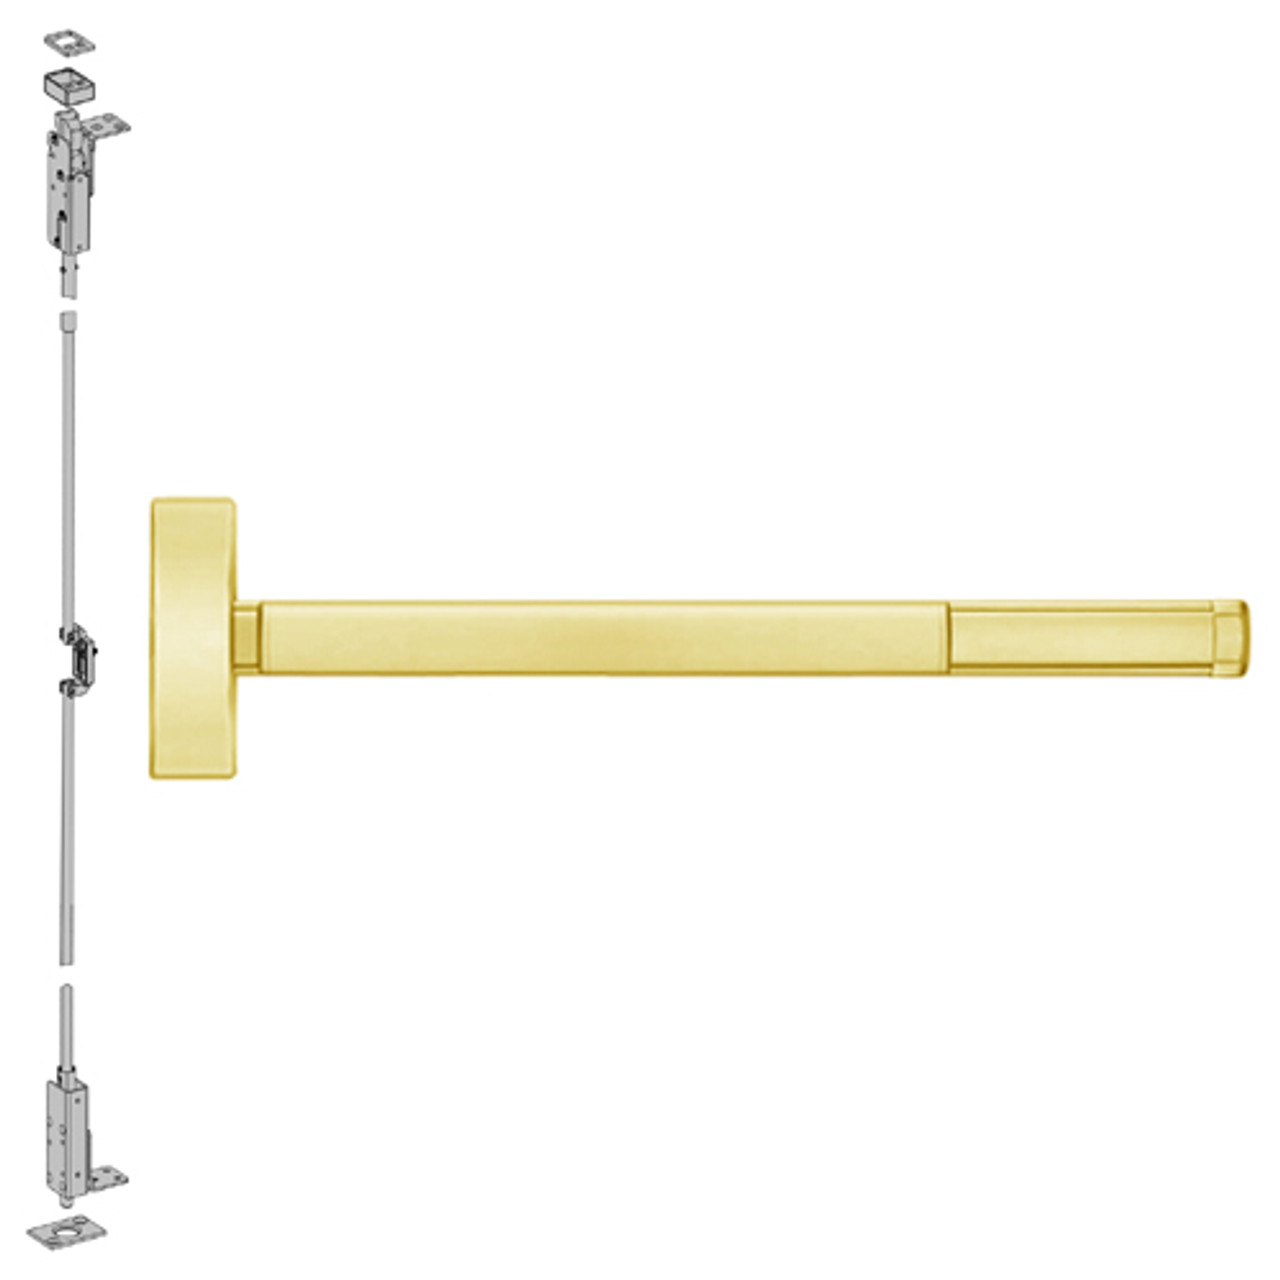 DEFL2714-605-36 PHI 2700 Series Fire Rated Wood Door Concealed Vertical Exit Device with Delayed Egress Prepped for Lever-Knob Always Active in Bright Brass Finish